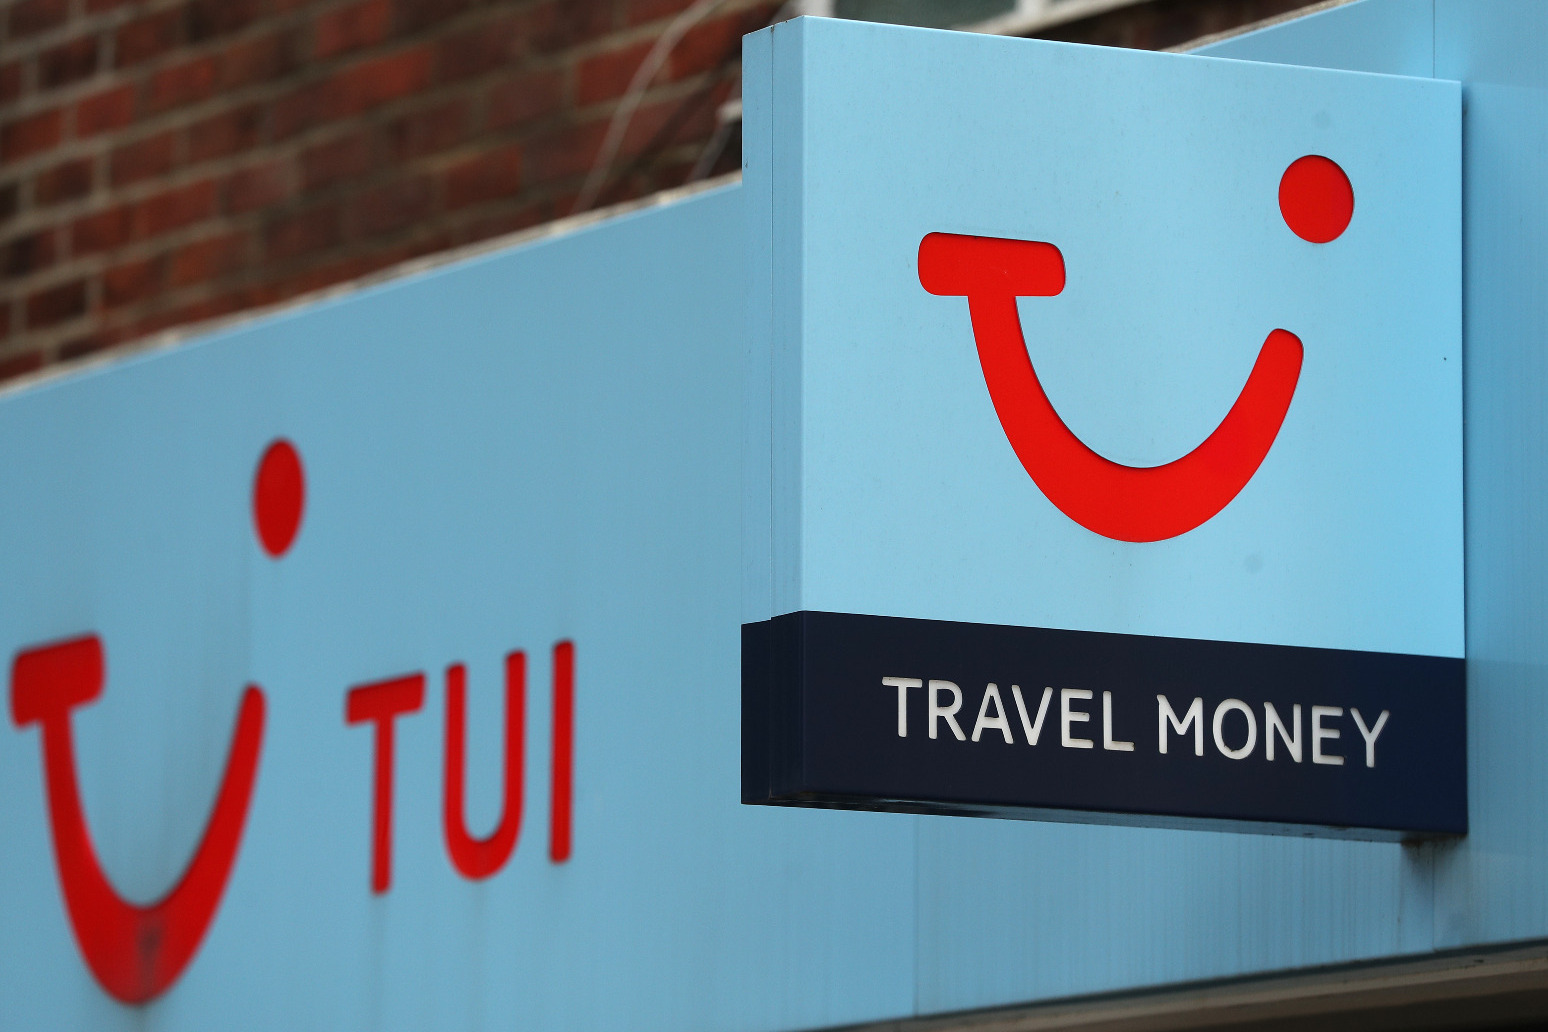 Tui sees record bookings as travel recovery remains on track 